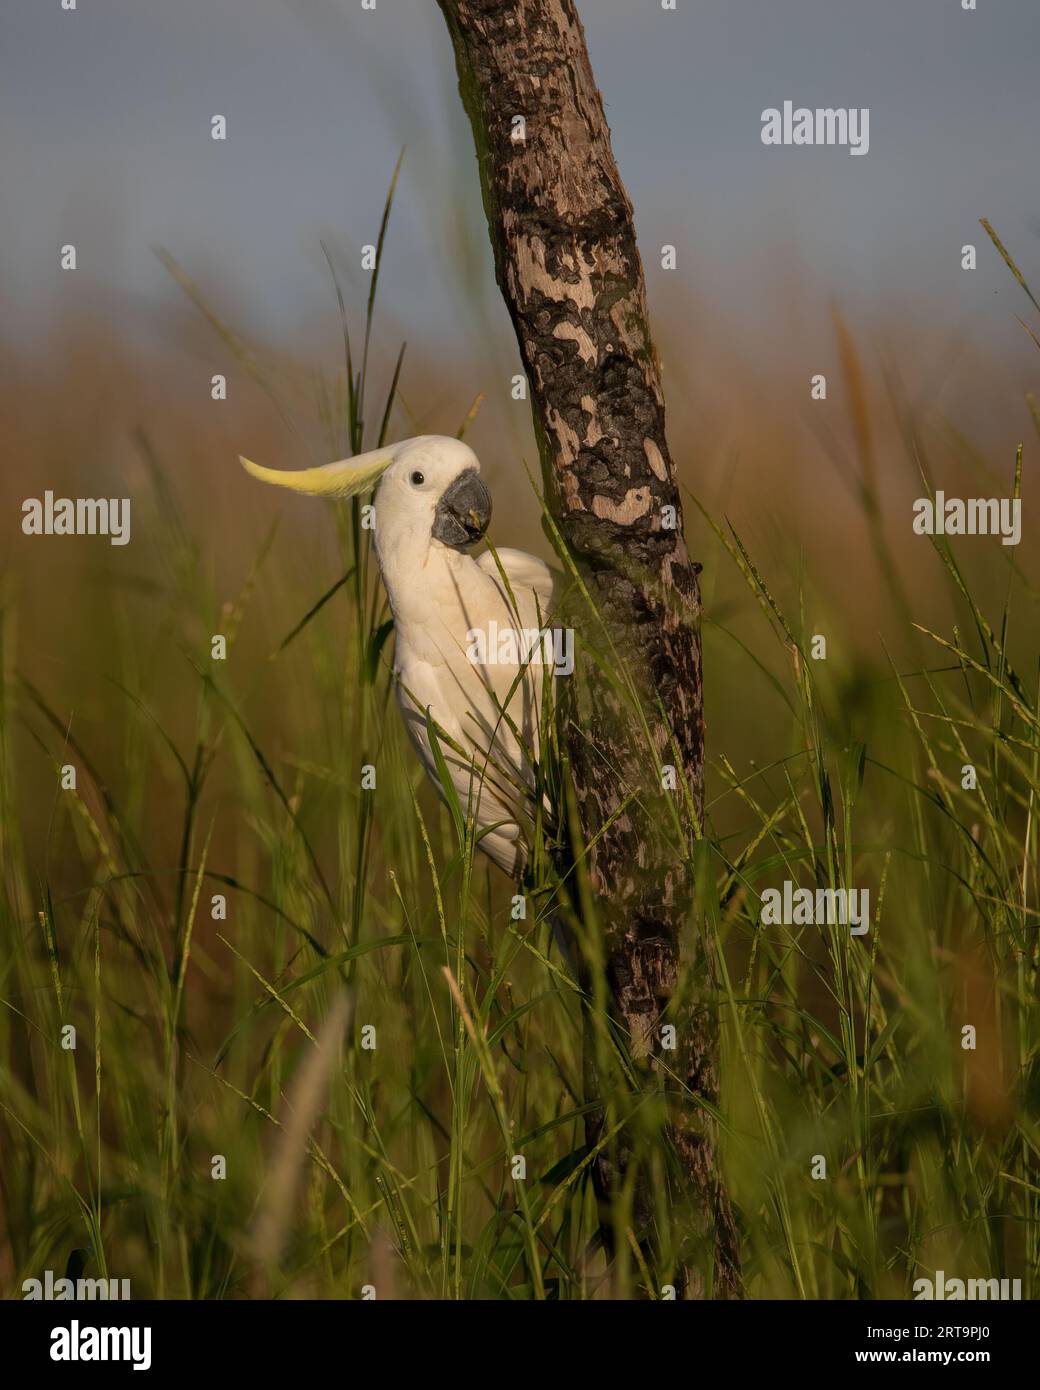 A Sulphur-Crested Cockatoo plays hide and seek with me. Northern Territory, Australia. Stock Photo